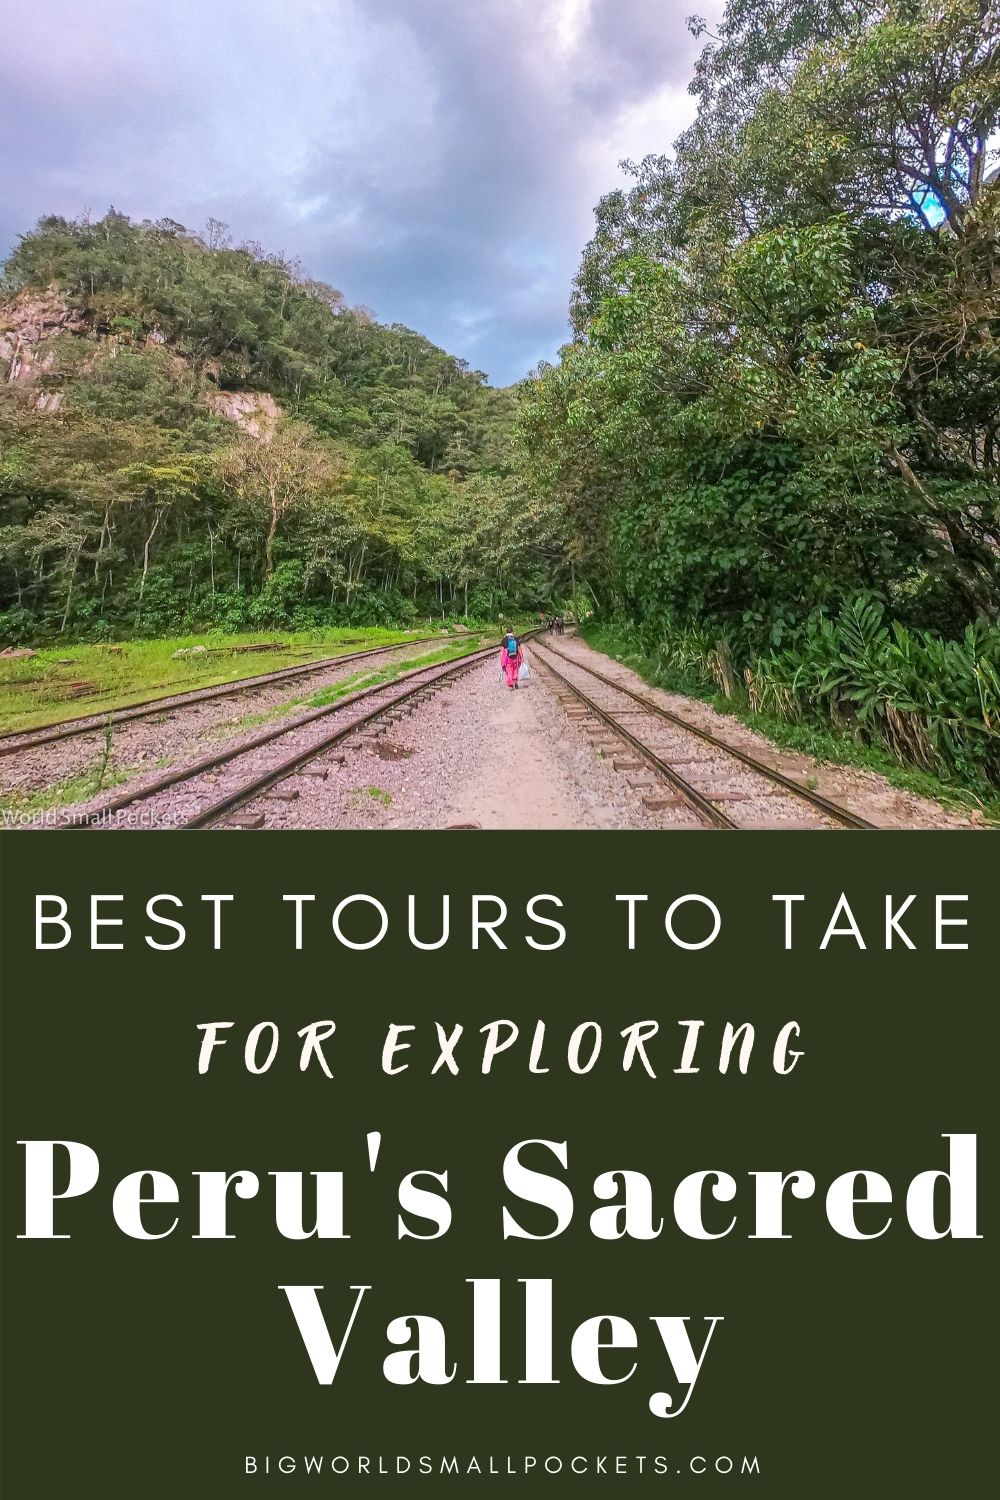 The Best Tours to Take in Peru's Sacred Valley